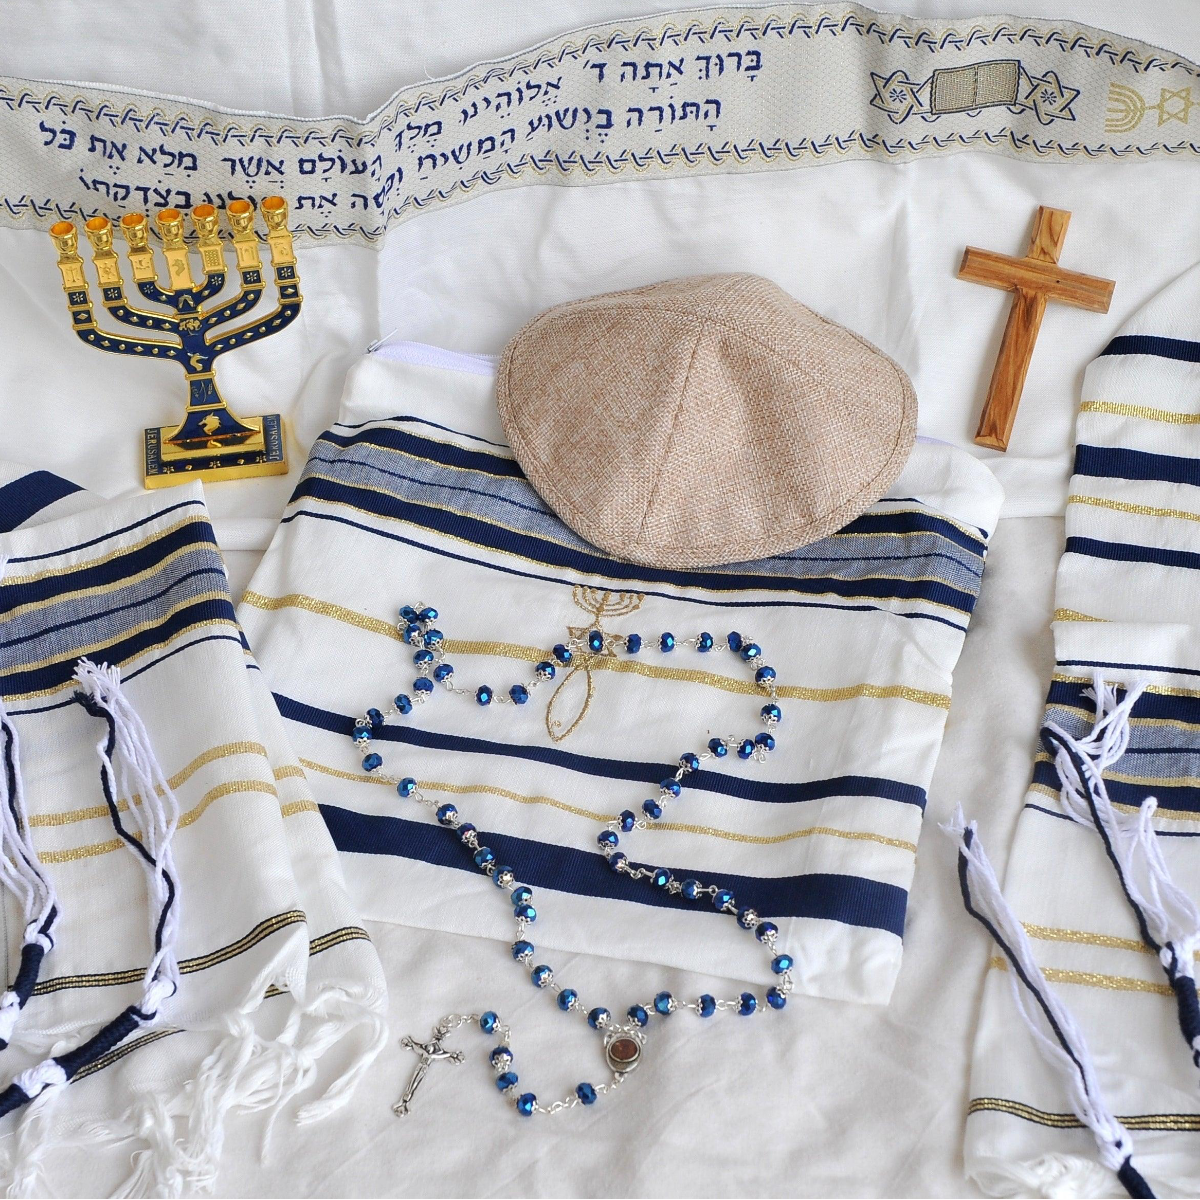 Judaism's rituals to honor new mothers are ever-rooted, ever-changing –  from medieval embroidery and prayer to new traditions today